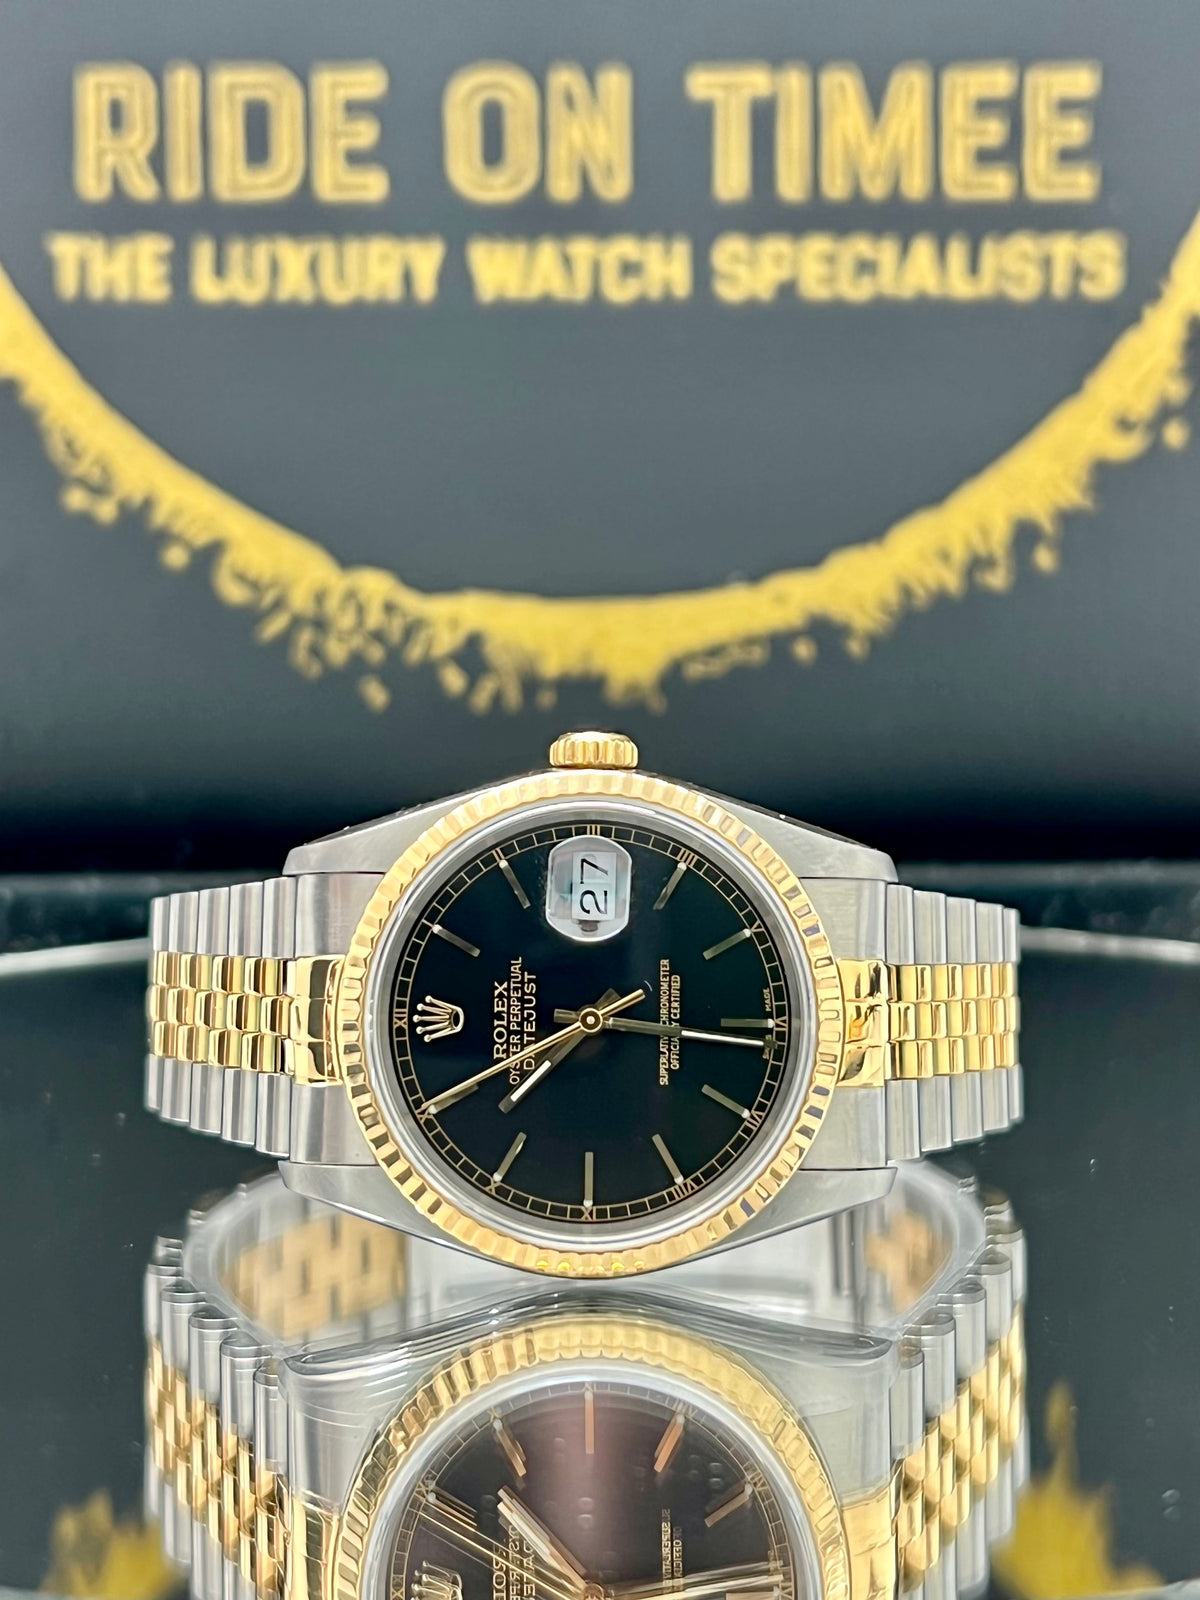 Rolex Datejust 36 Factory Black Baton Dial ‘16233’ - Ride On Timee